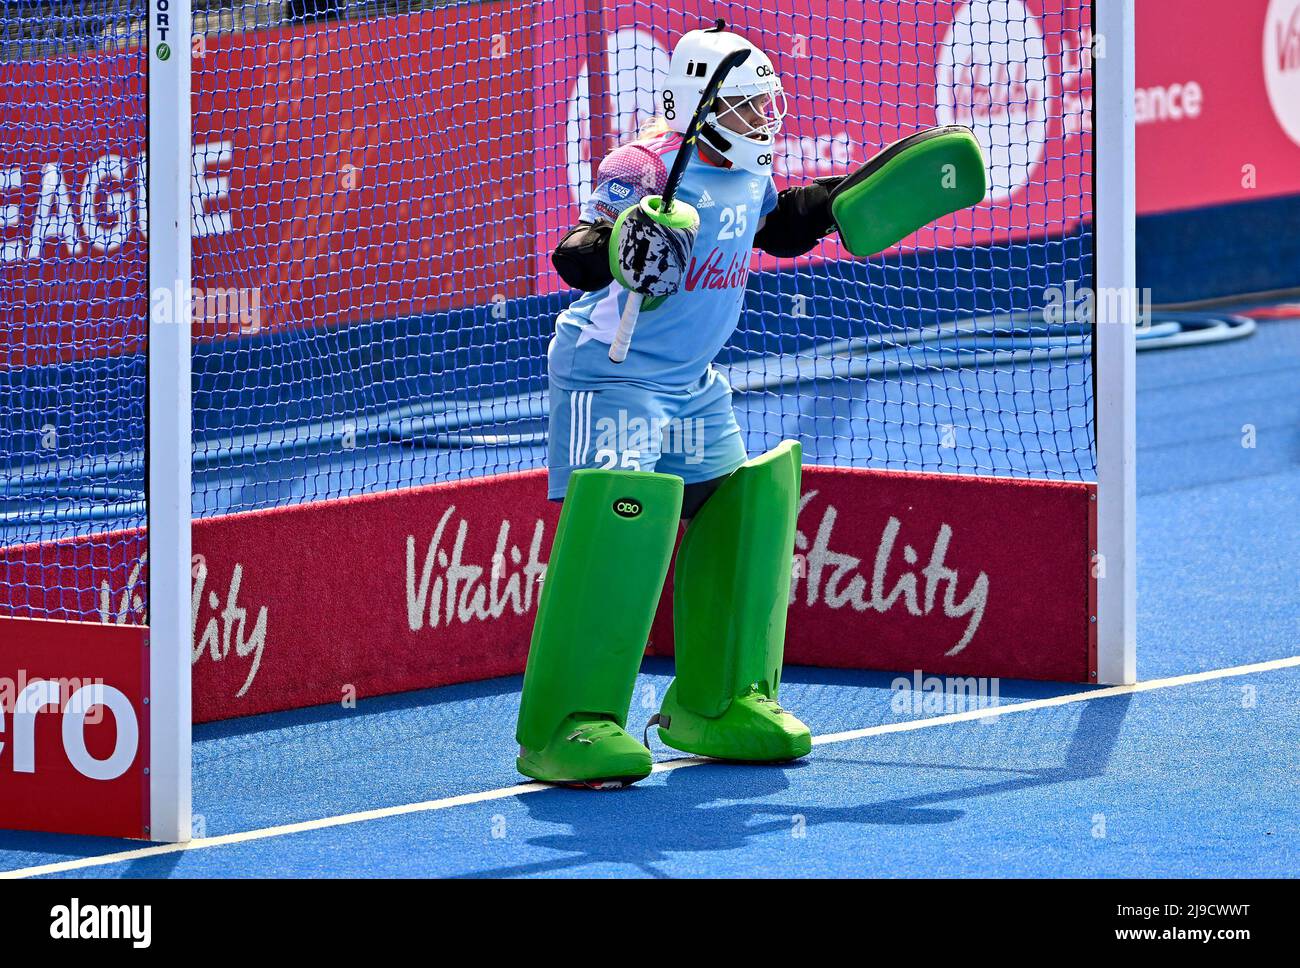 Stratford, United Kingdom. 22nd May, 2022. England V China Womens FIH Pro League. Lee Valley Hockey centre. Stratford. Sabbie Heesh (England, goalkeeper) faces a penalty shot during the England V China Womens FIH Pro League hockey match. Credit: Sport In Pictures/Alamy Live News Stock Photo